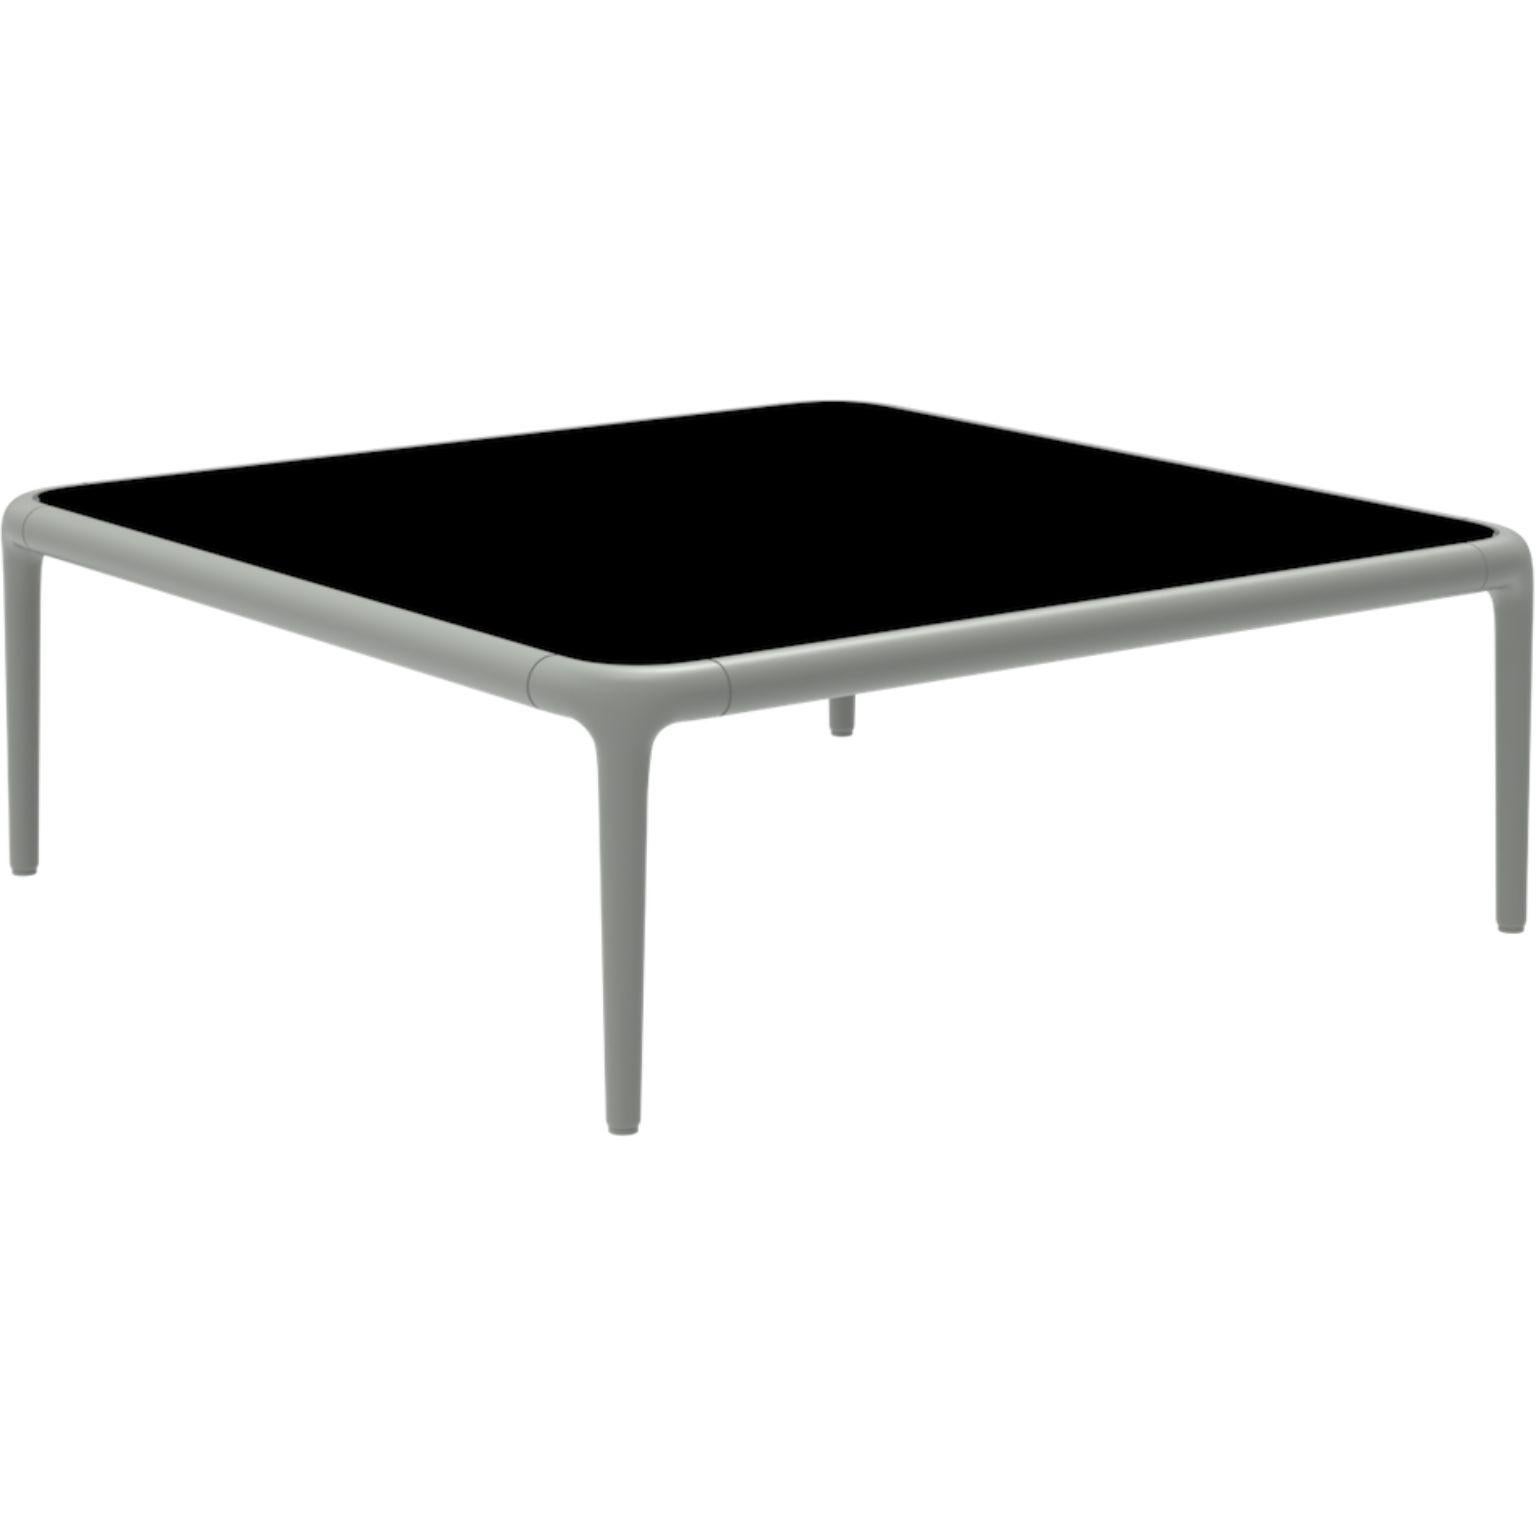 Xaloc silver coffee table 80 with glass top by Mowee.
Dimensions: D80 x W80 x H28 cm.
Materials: Aluminum, tinted tempered glass top.
Also available in different aluminum colors and finishes (HPL Black Edge or Neolith).

Xaloc synthesizes the